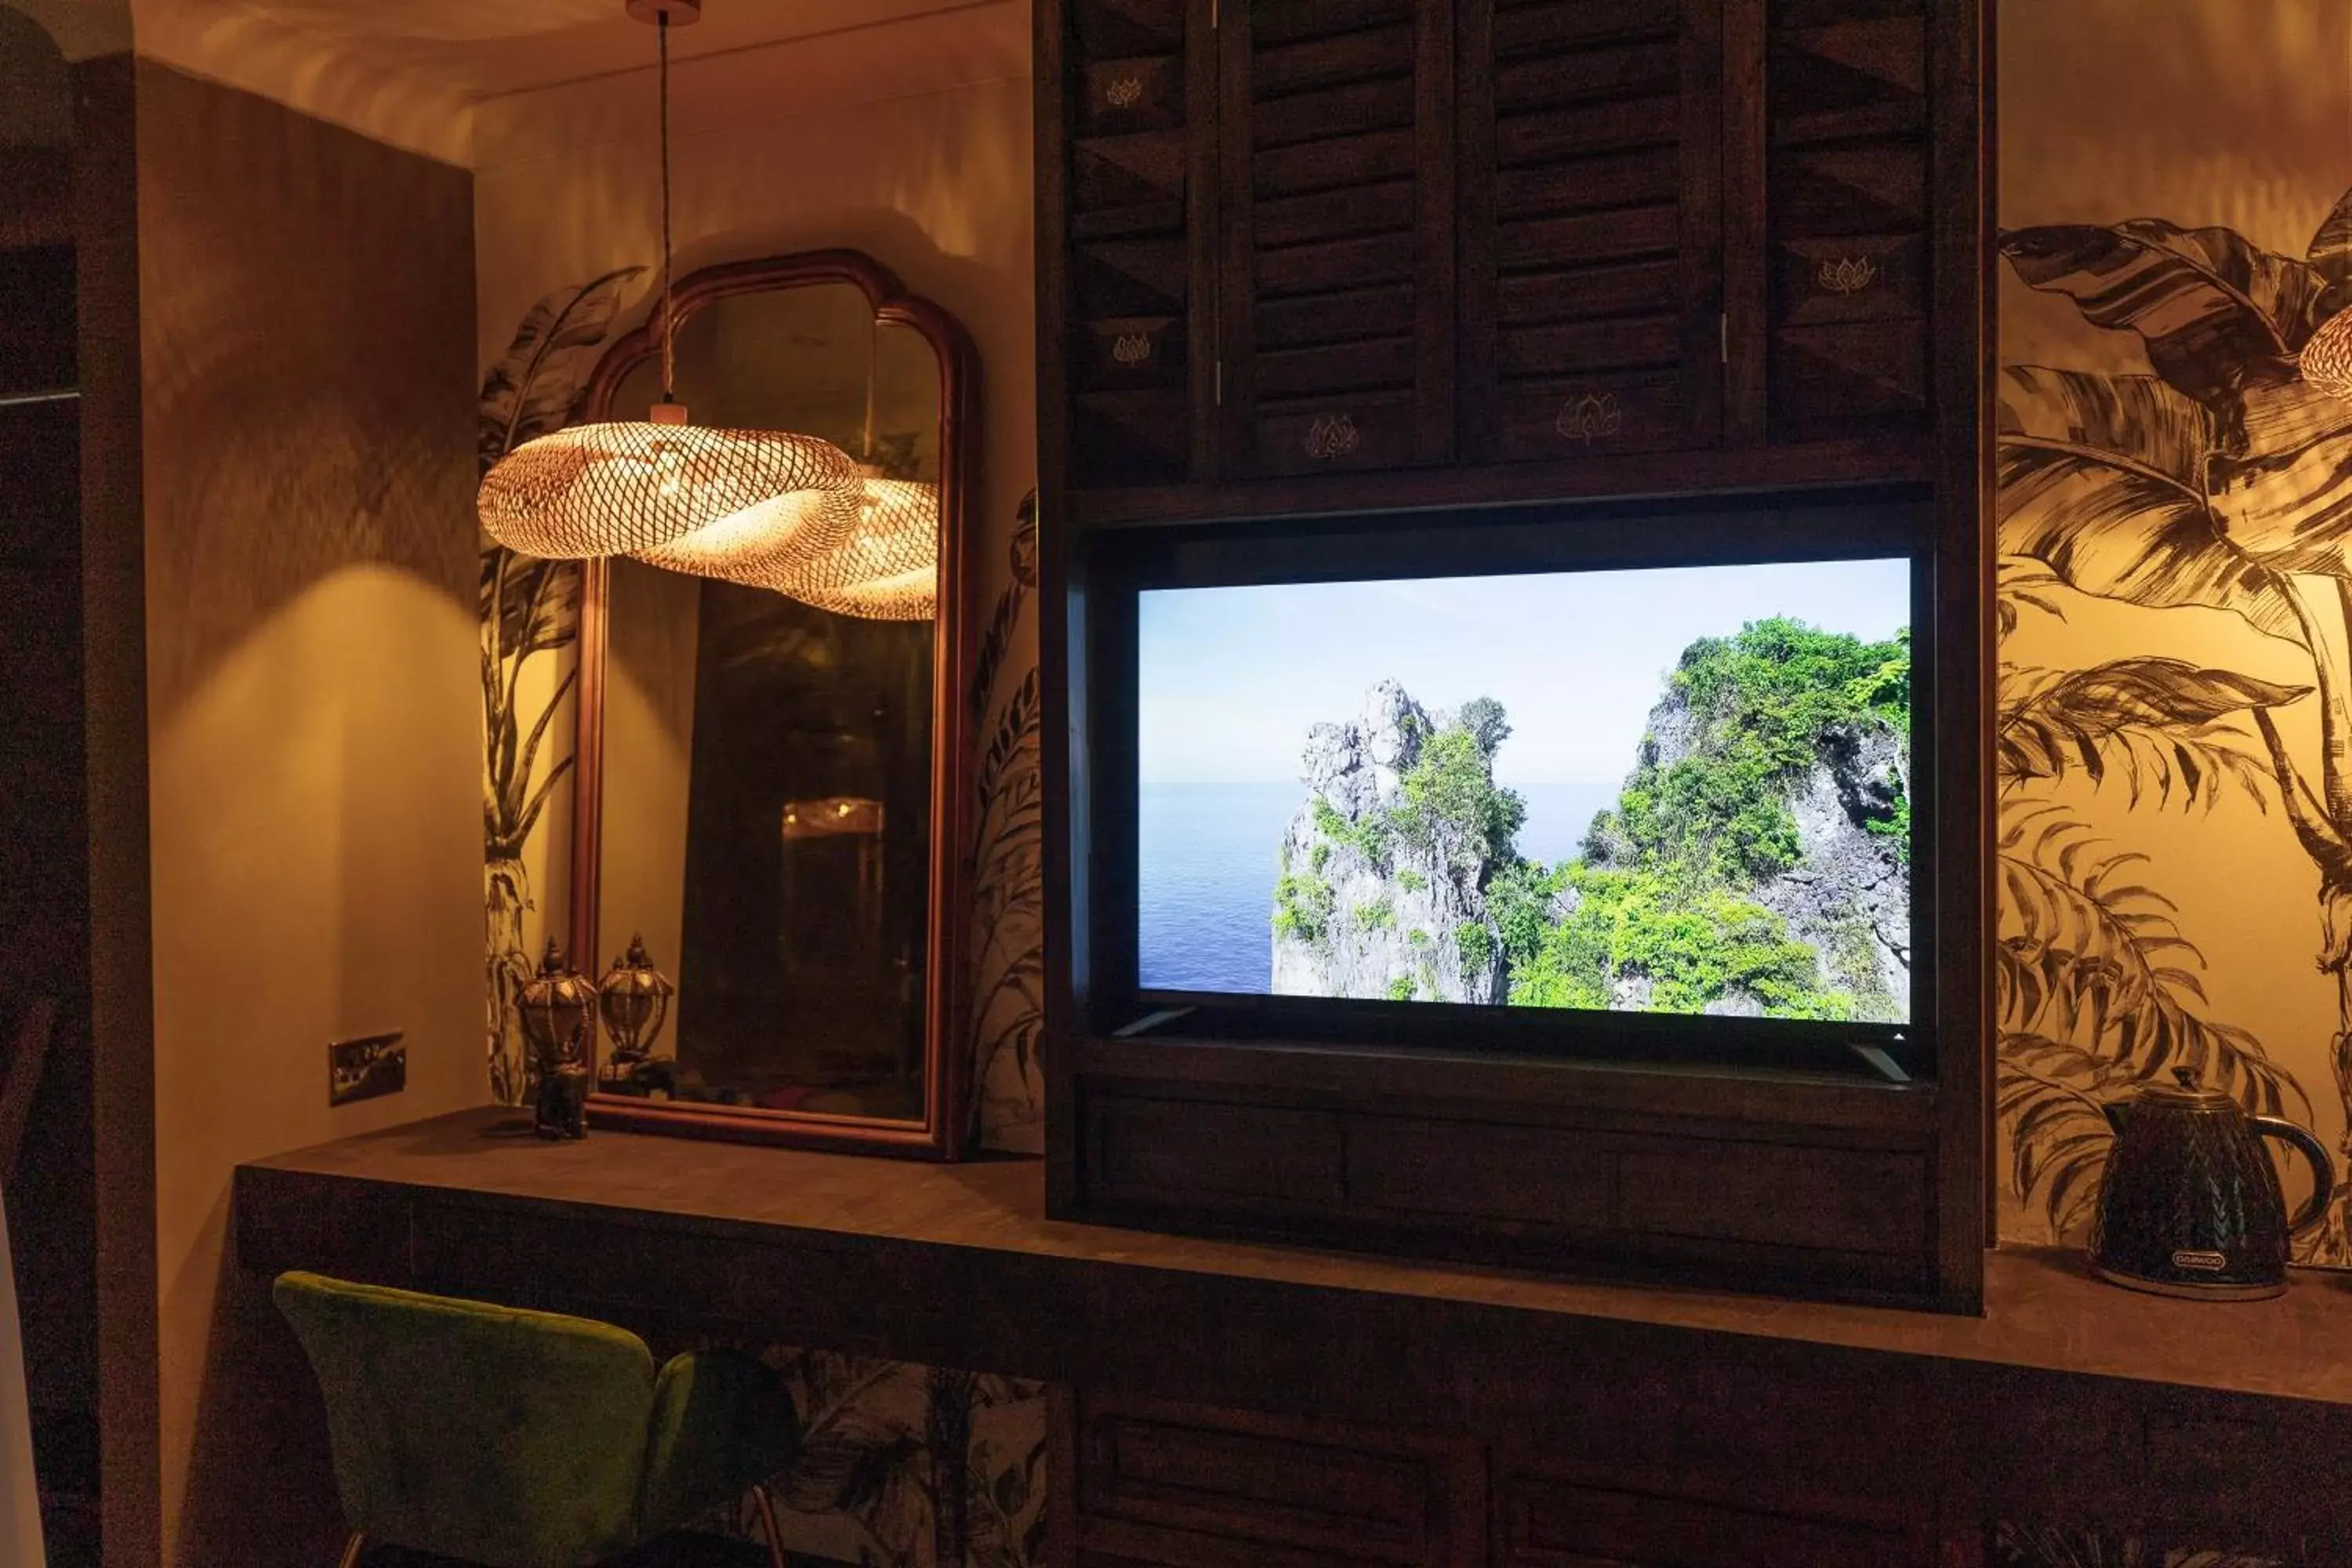 TV and multimedia in The Imperial Dragon Hotel